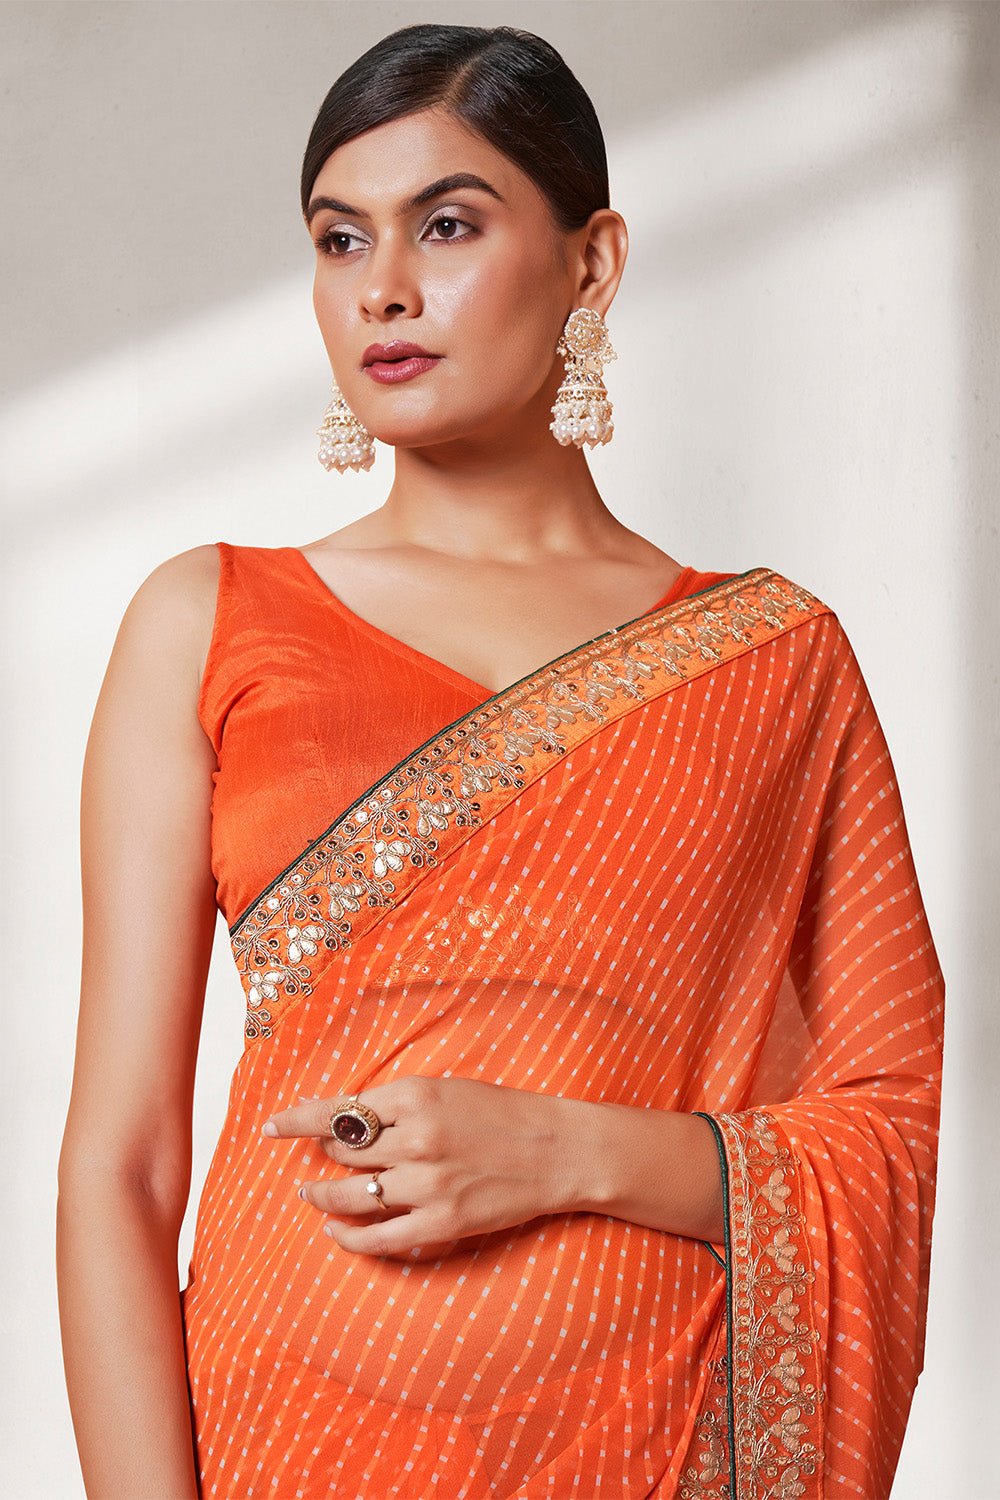 Which colour blouse can go with an orange saree? - Quora